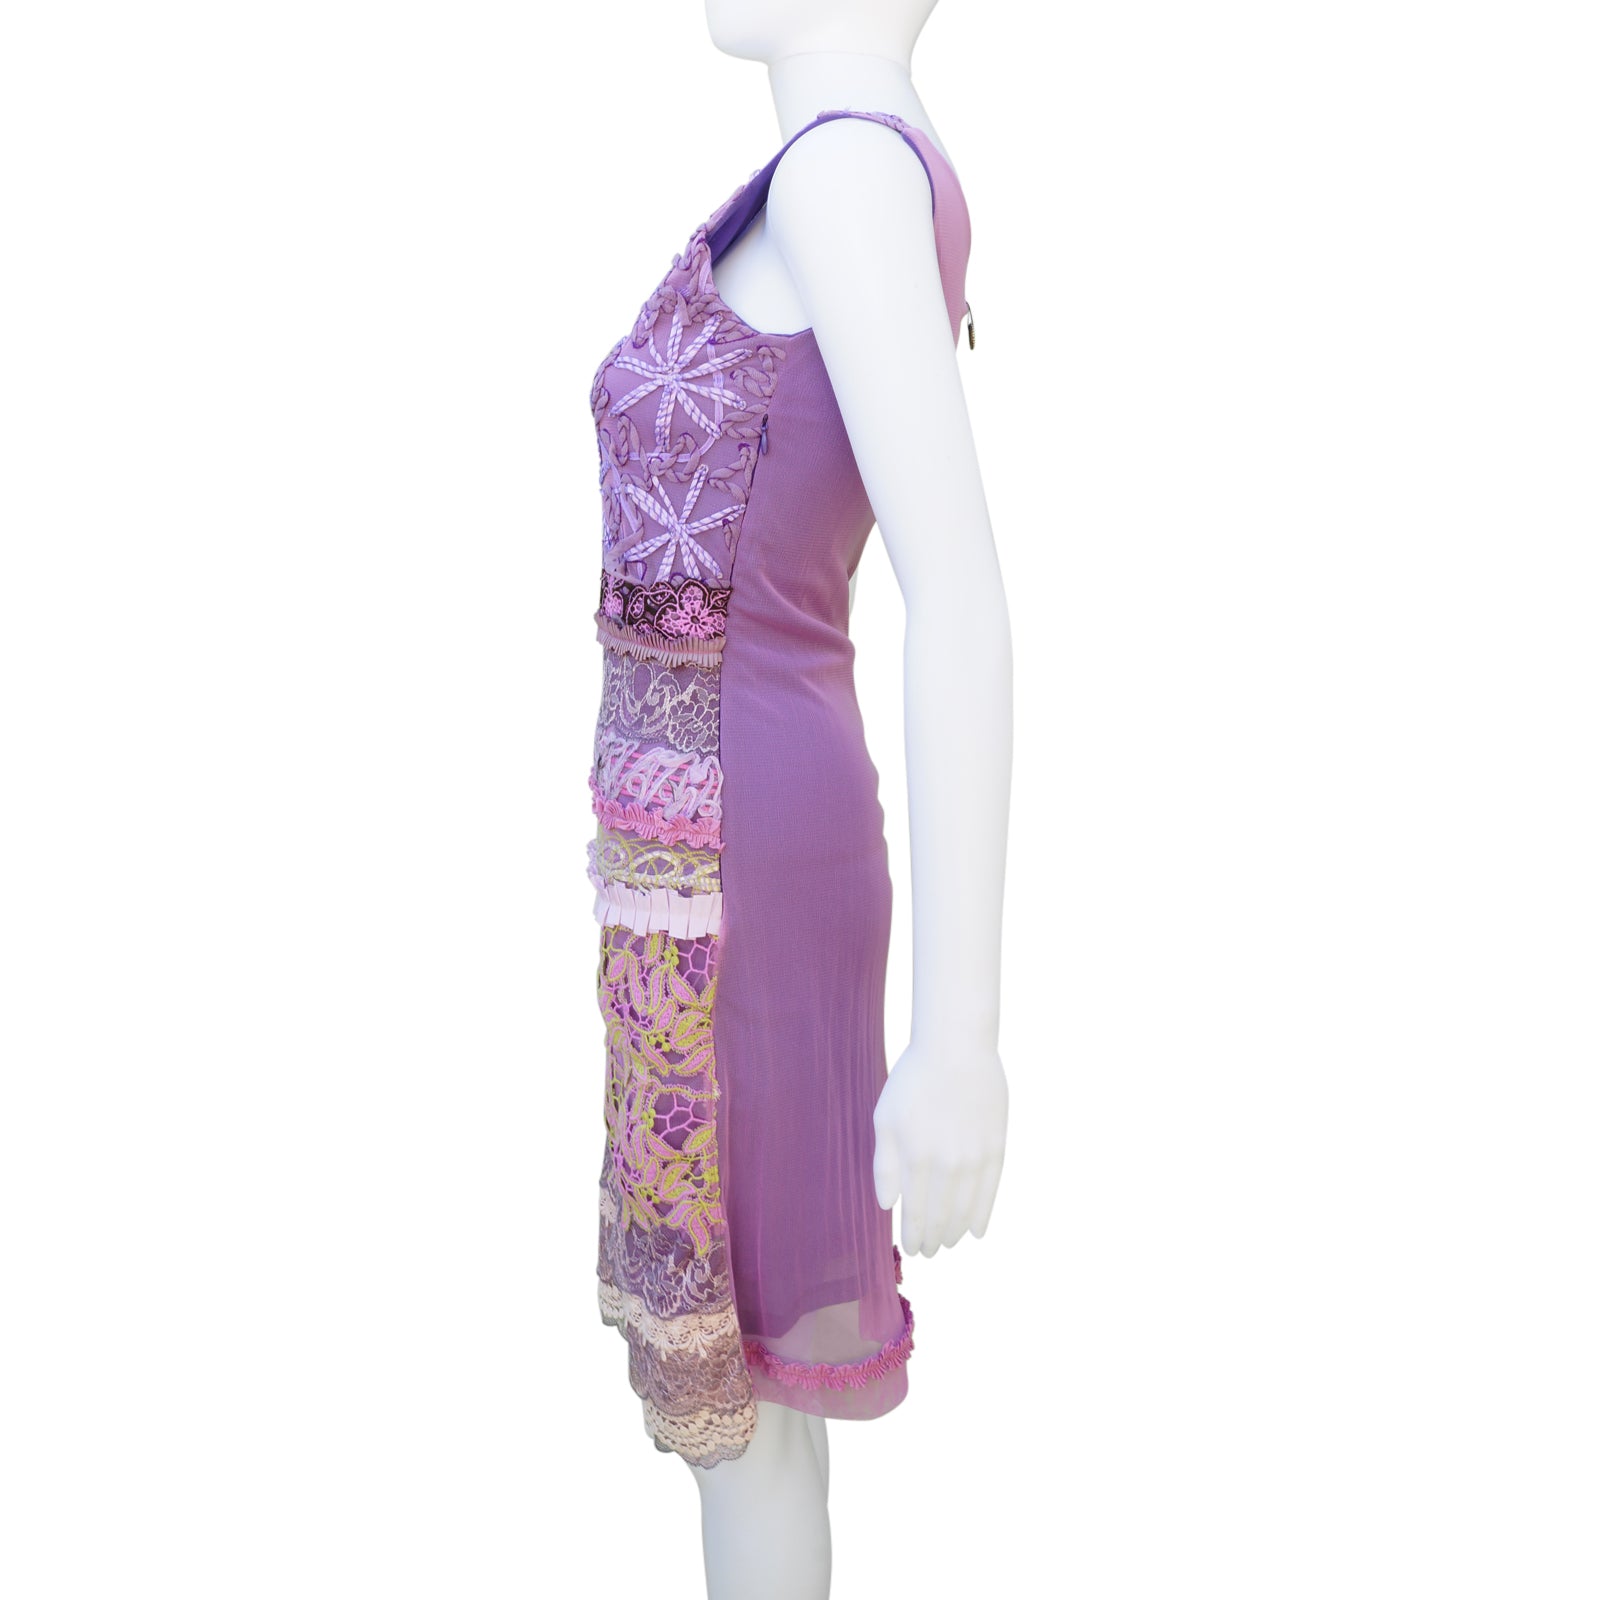 SAVE THE QUEEN PURPLE EMBROIDERED SLEEVELESS COCKTAIL NIGHT OUT DRESS - leefluxury.com